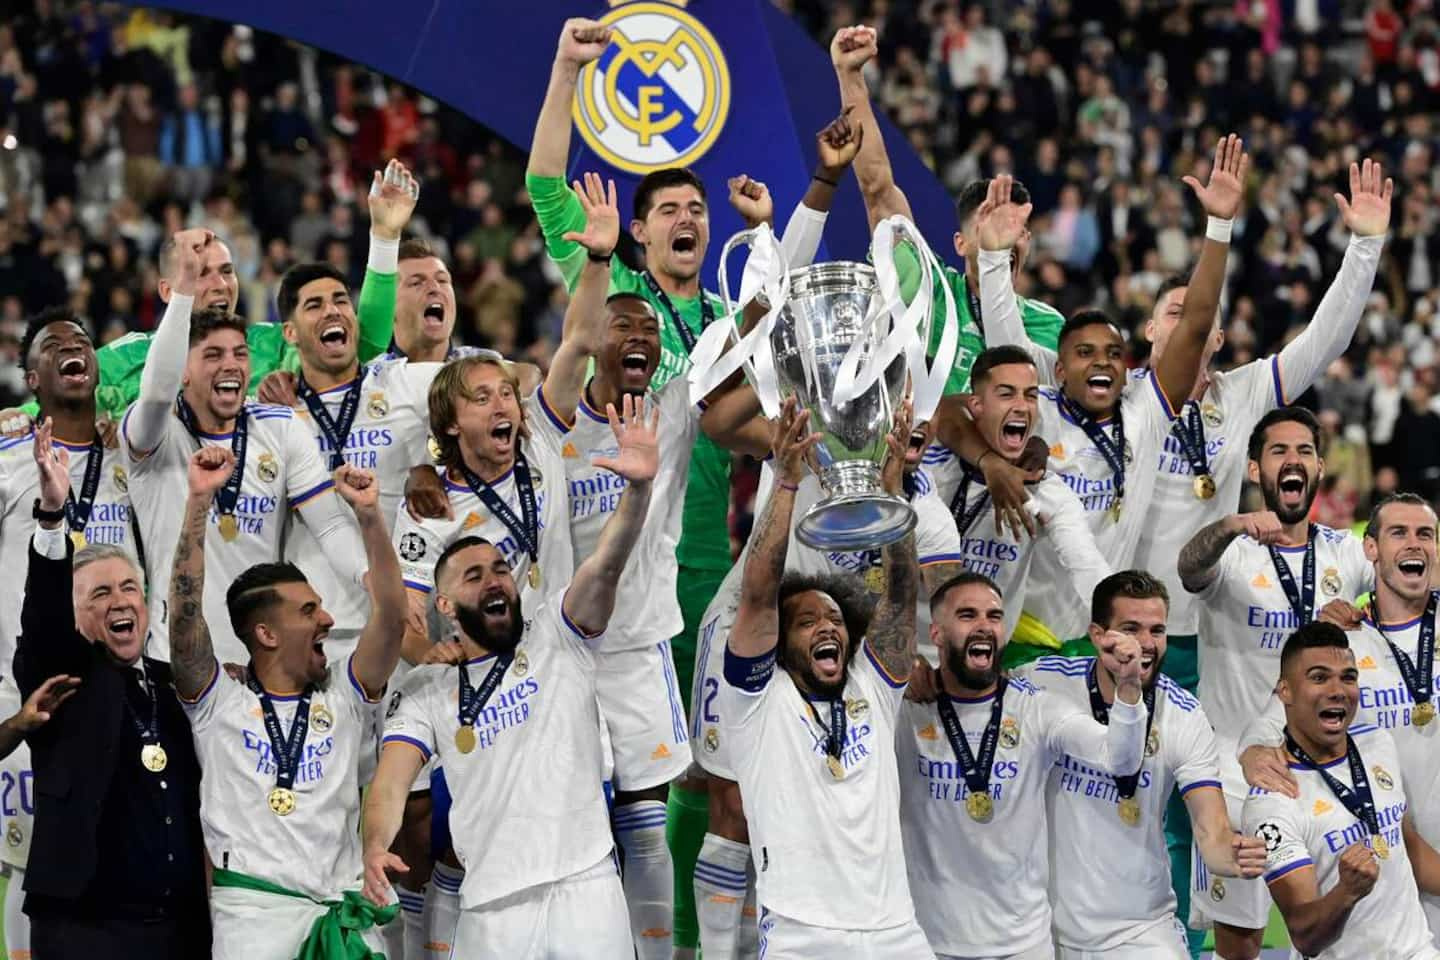 A 14th title for Real Madrid in the Champions League